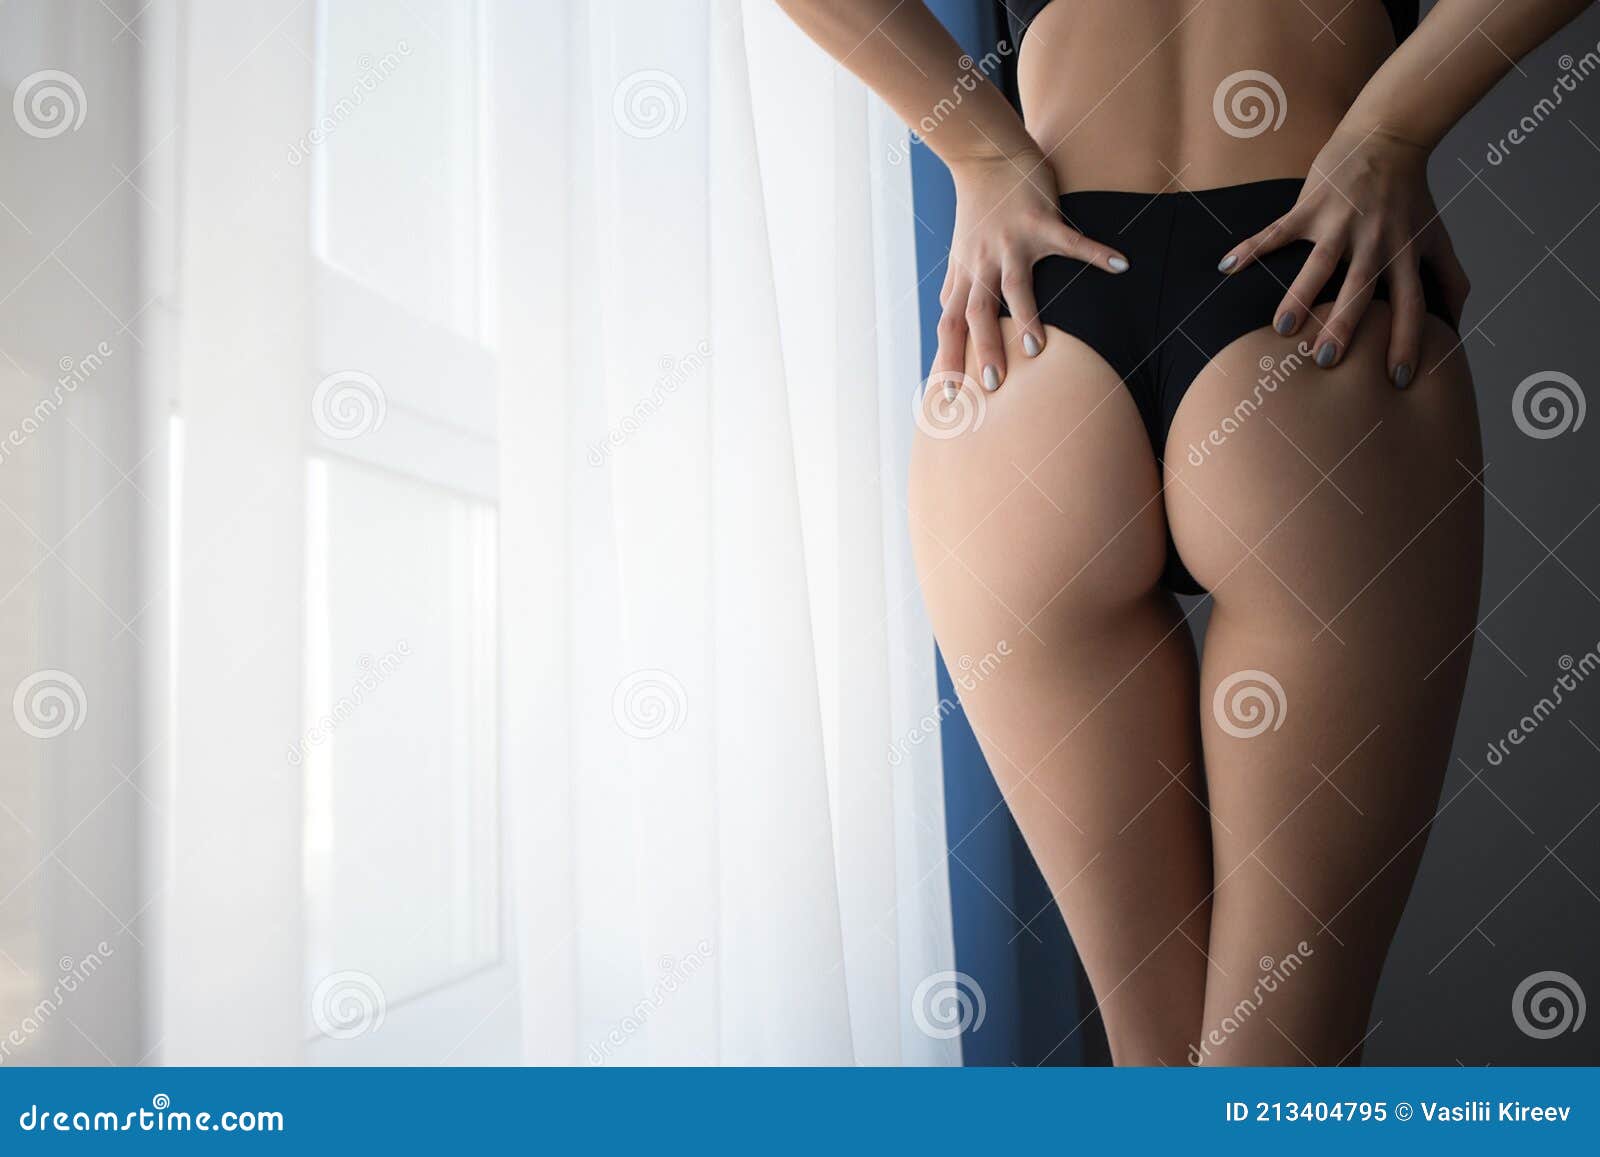 Crop Woman with Perfect Buttocks Stock Image photo